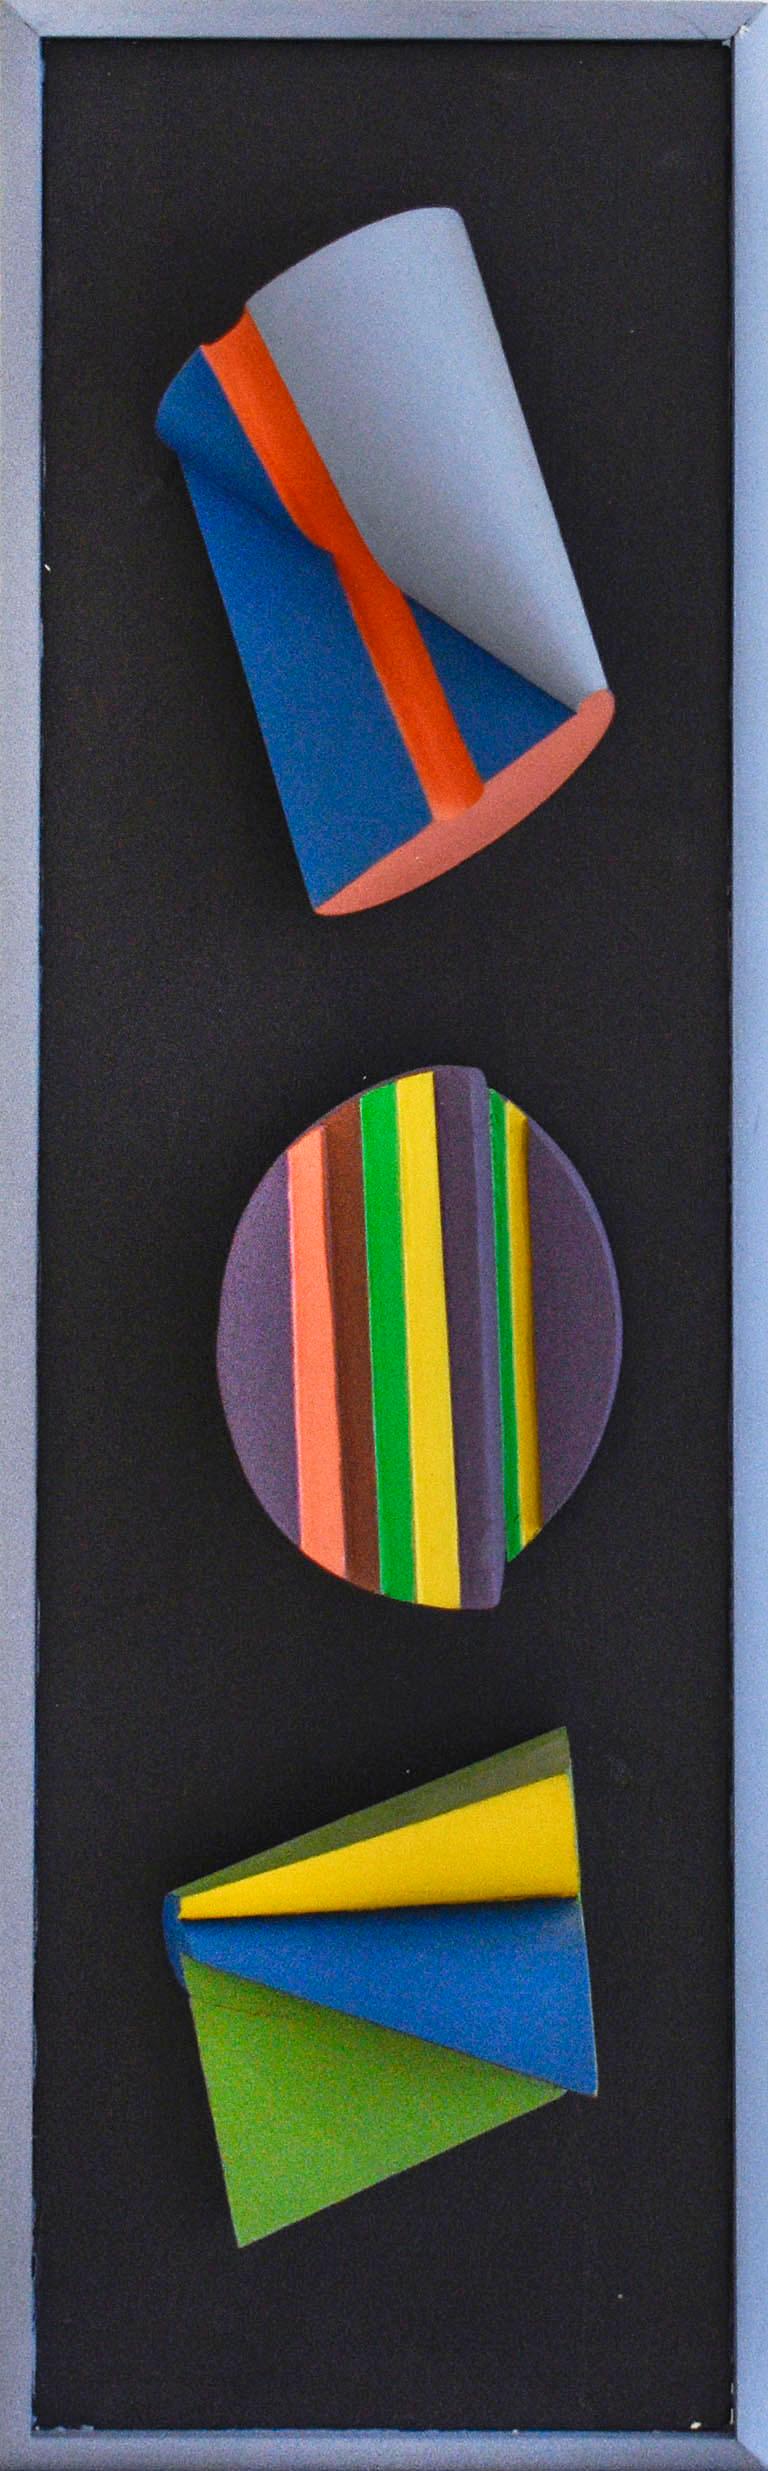 Trio: Colorful Abstract Geometric Three Dimensional Wall Sculpture on Panel